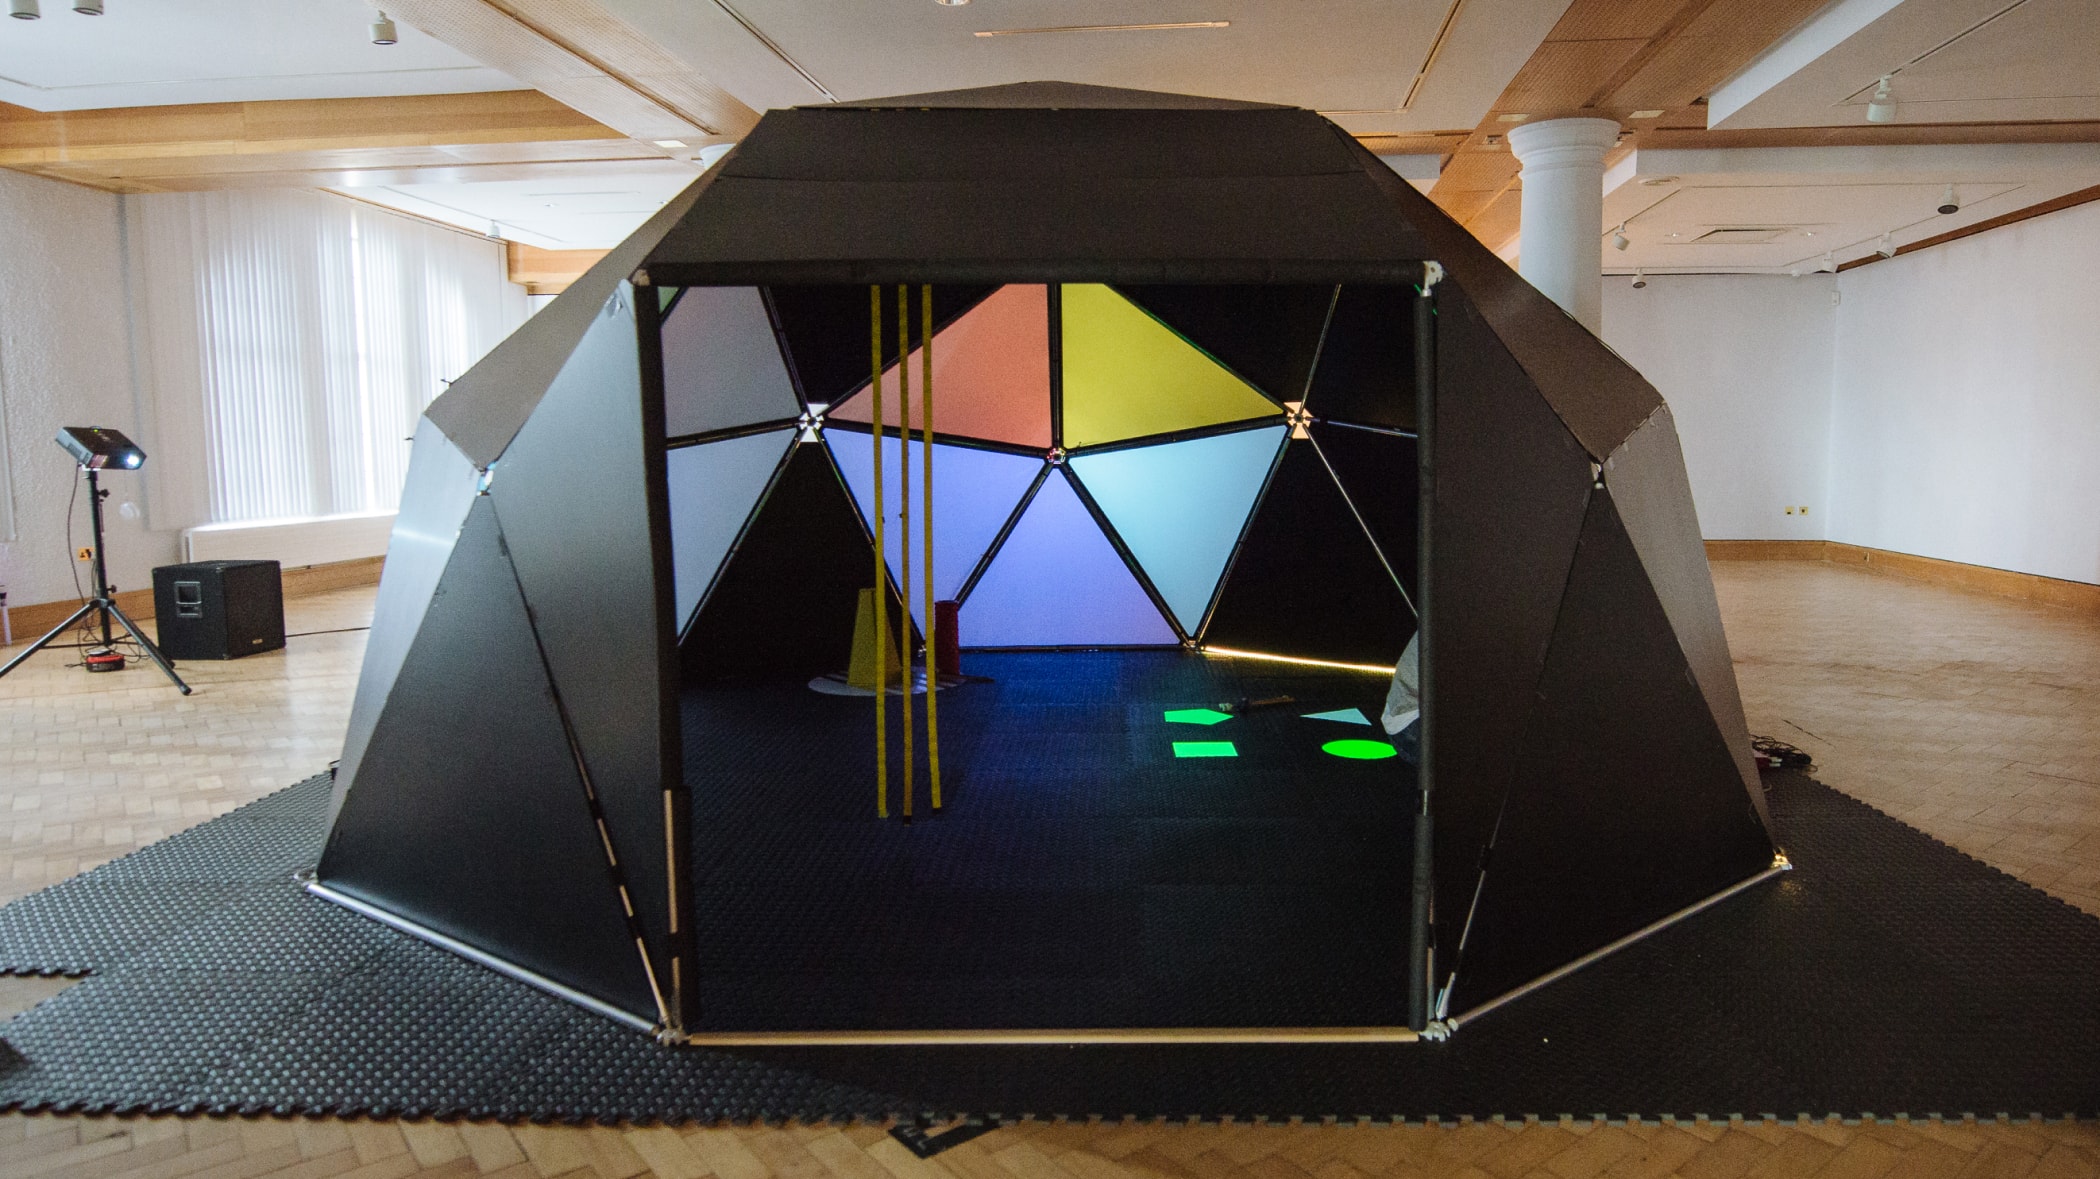 A black geometric dome with colours and instruments inside